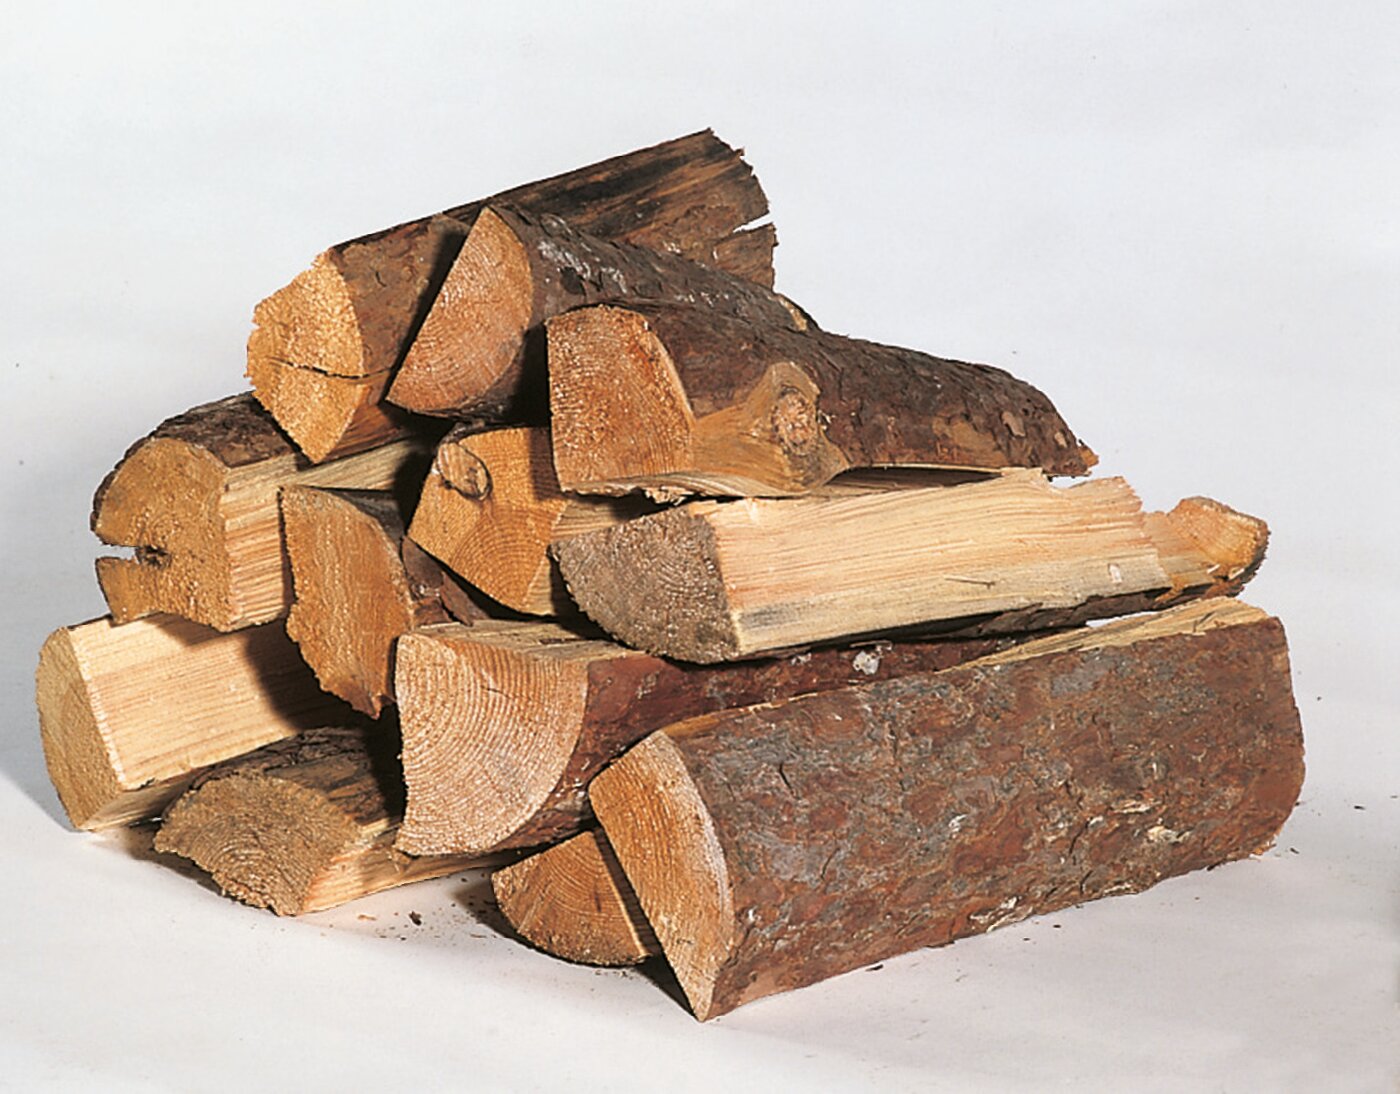 What are Logs?